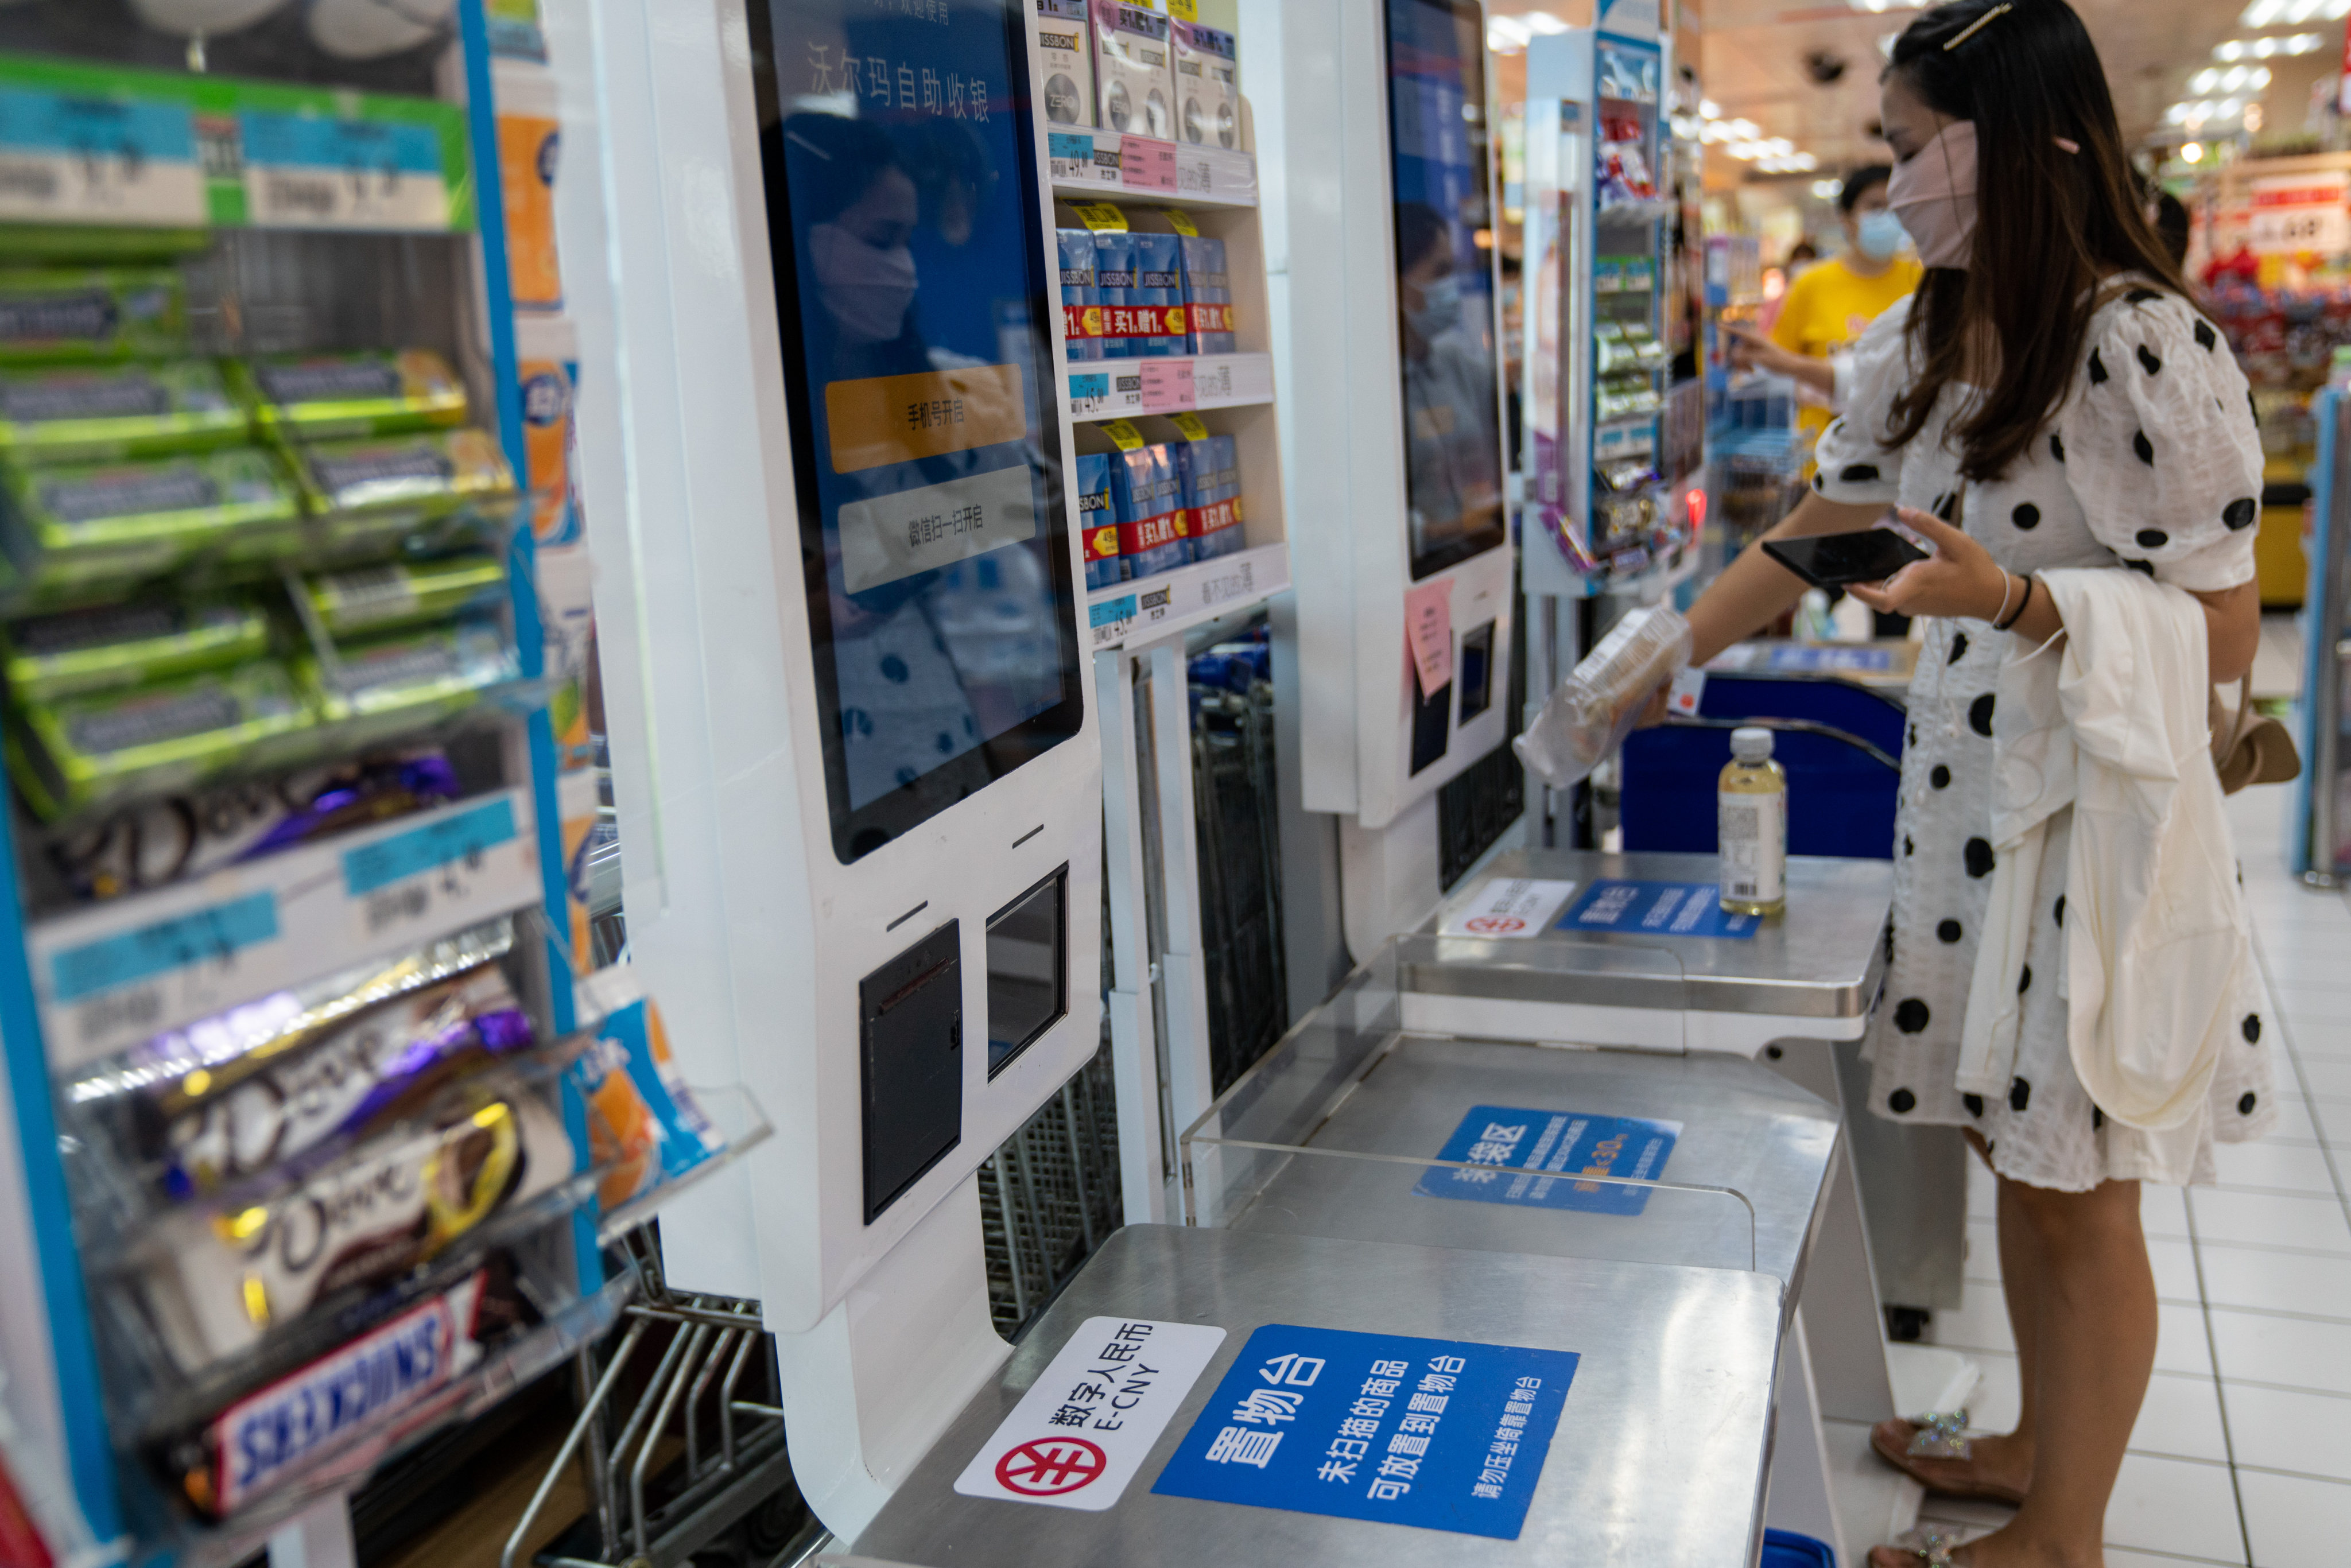 Signage for the digital yuan, or e-CNY, at a self check-out counter inside a supermarket in Shenzhen. Rather than replace existing digital payment platforms, as predicted by some, China’s digital yuan will complement and work alongside them. Photo: Bloomberg